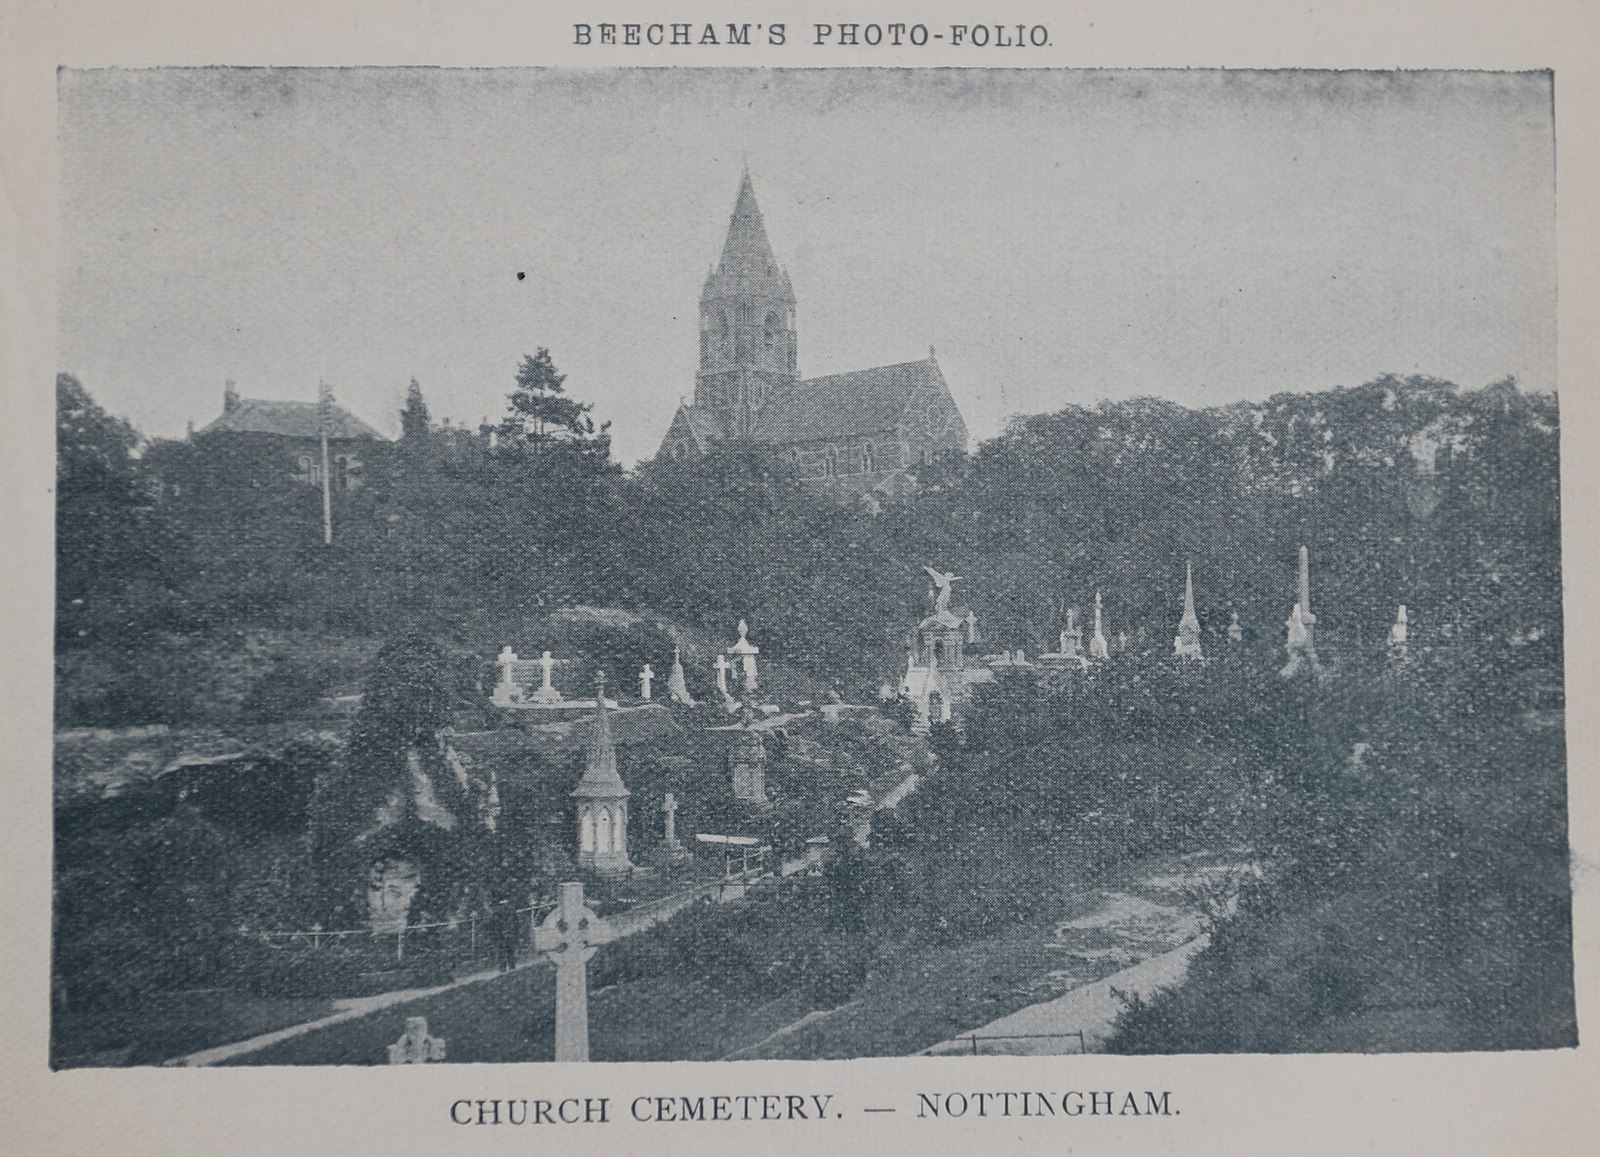 old photo of the churrch cemetery in Nottingham, England.